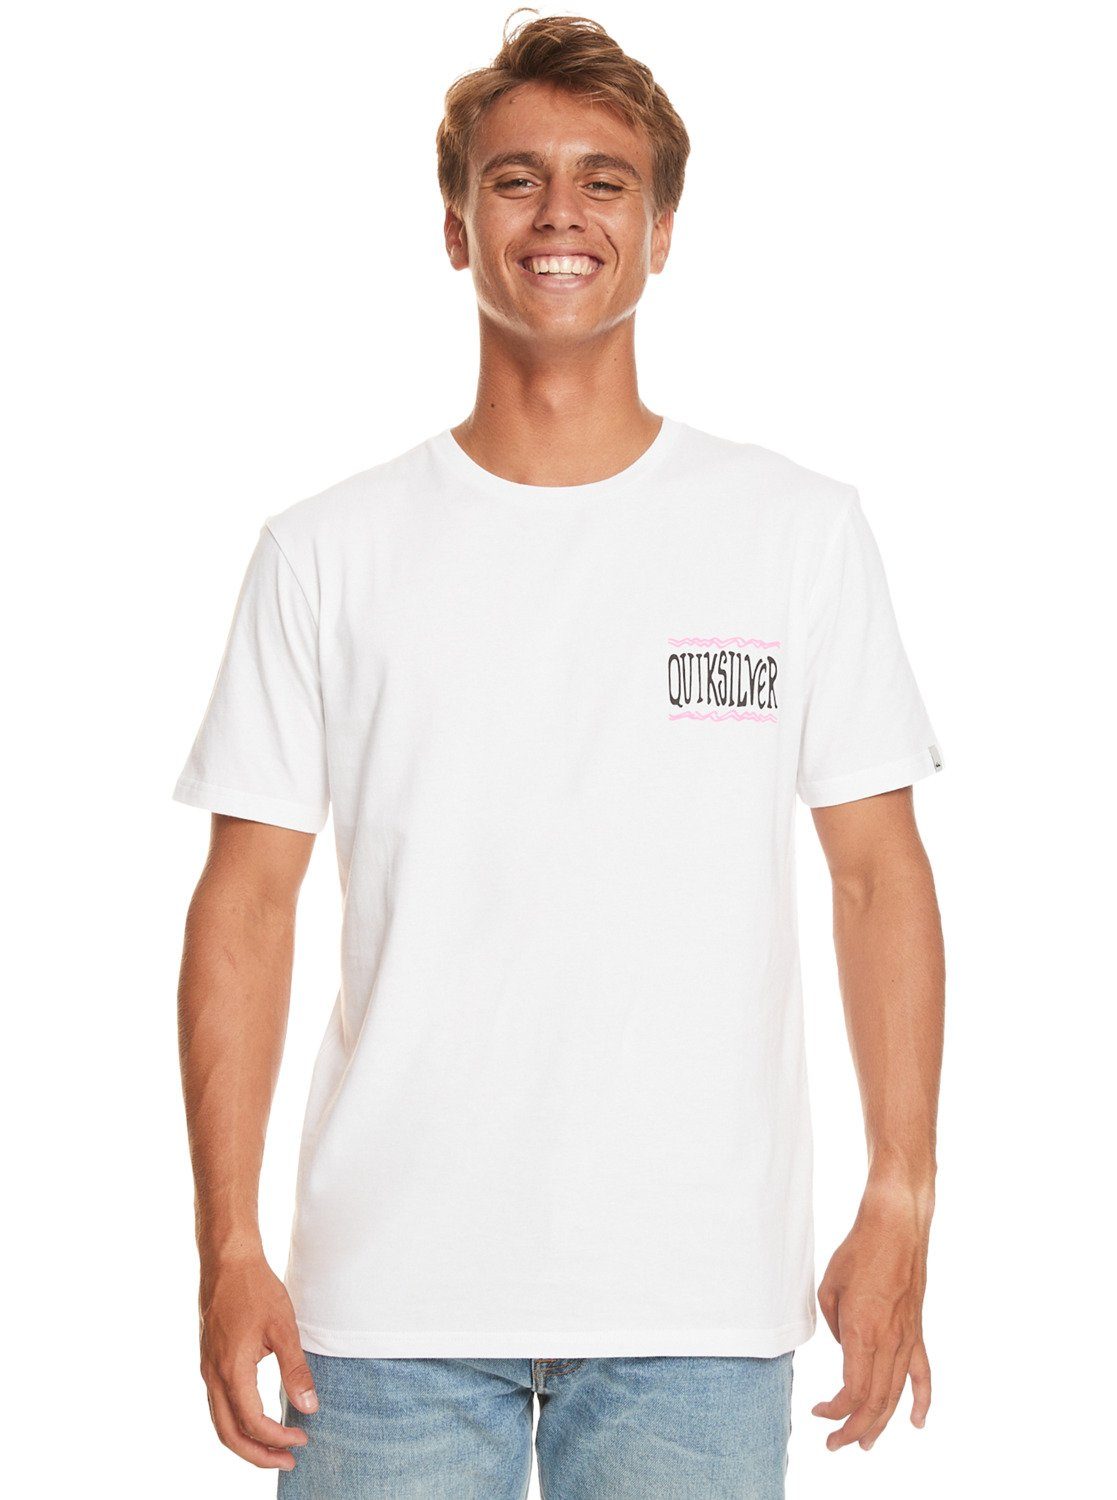 Taking Roots T-Shirt White Quiksilver